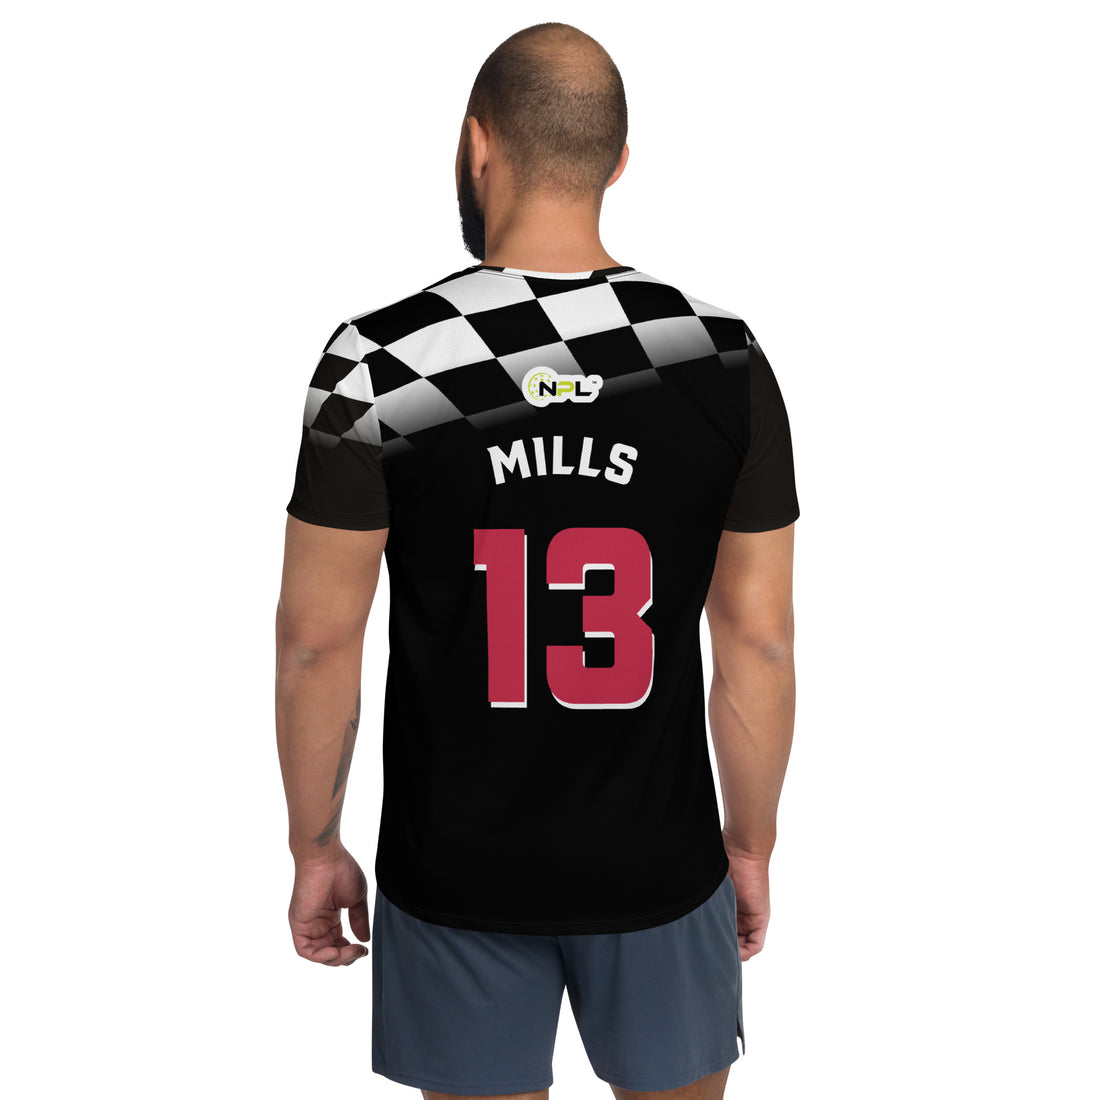 Mills 13, aka Chris Miller, Indy Drivers™ SKYblue™ 2023 Authentic Jersey - Black